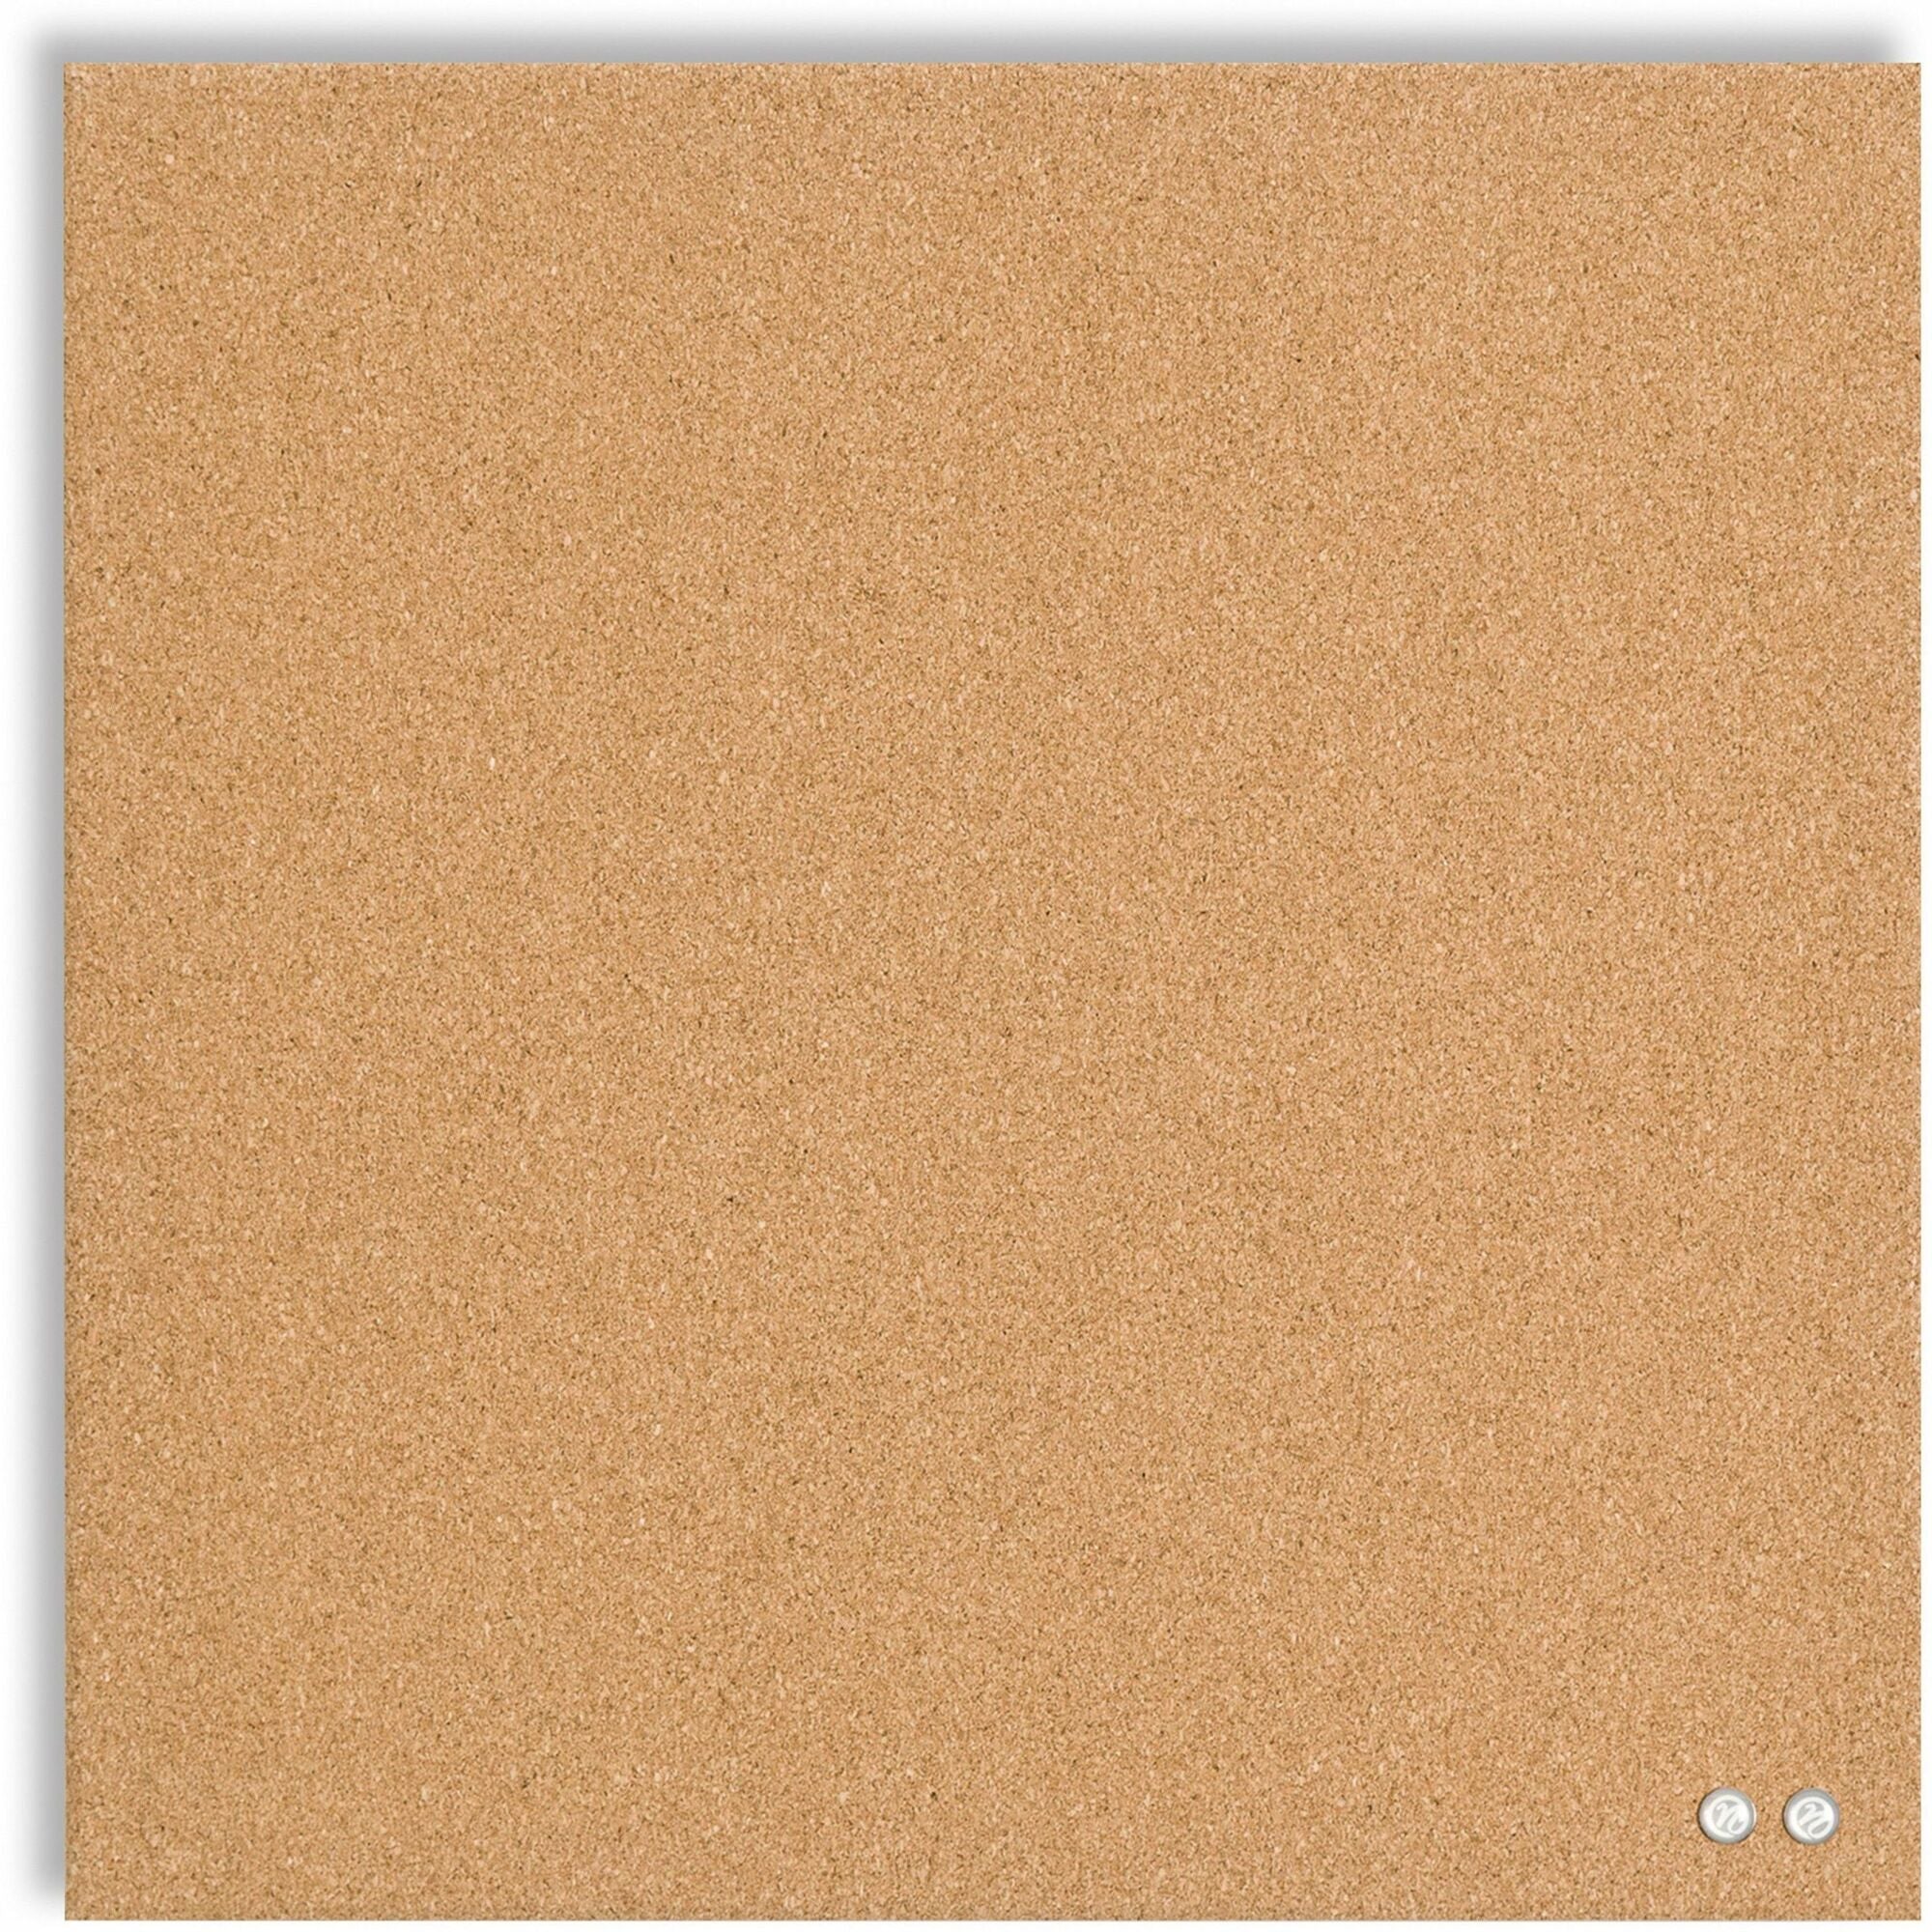 u-brands-square-cork-bulletin-board-14-x-14-inches-frameless-natural-push-pins-included-463u00-04-natural-cork-surface-self-healing-frameless-easy-installation-sleek-style-self-healing-mounting-system-1-each-14-x-14_ubr463u0004 - 1